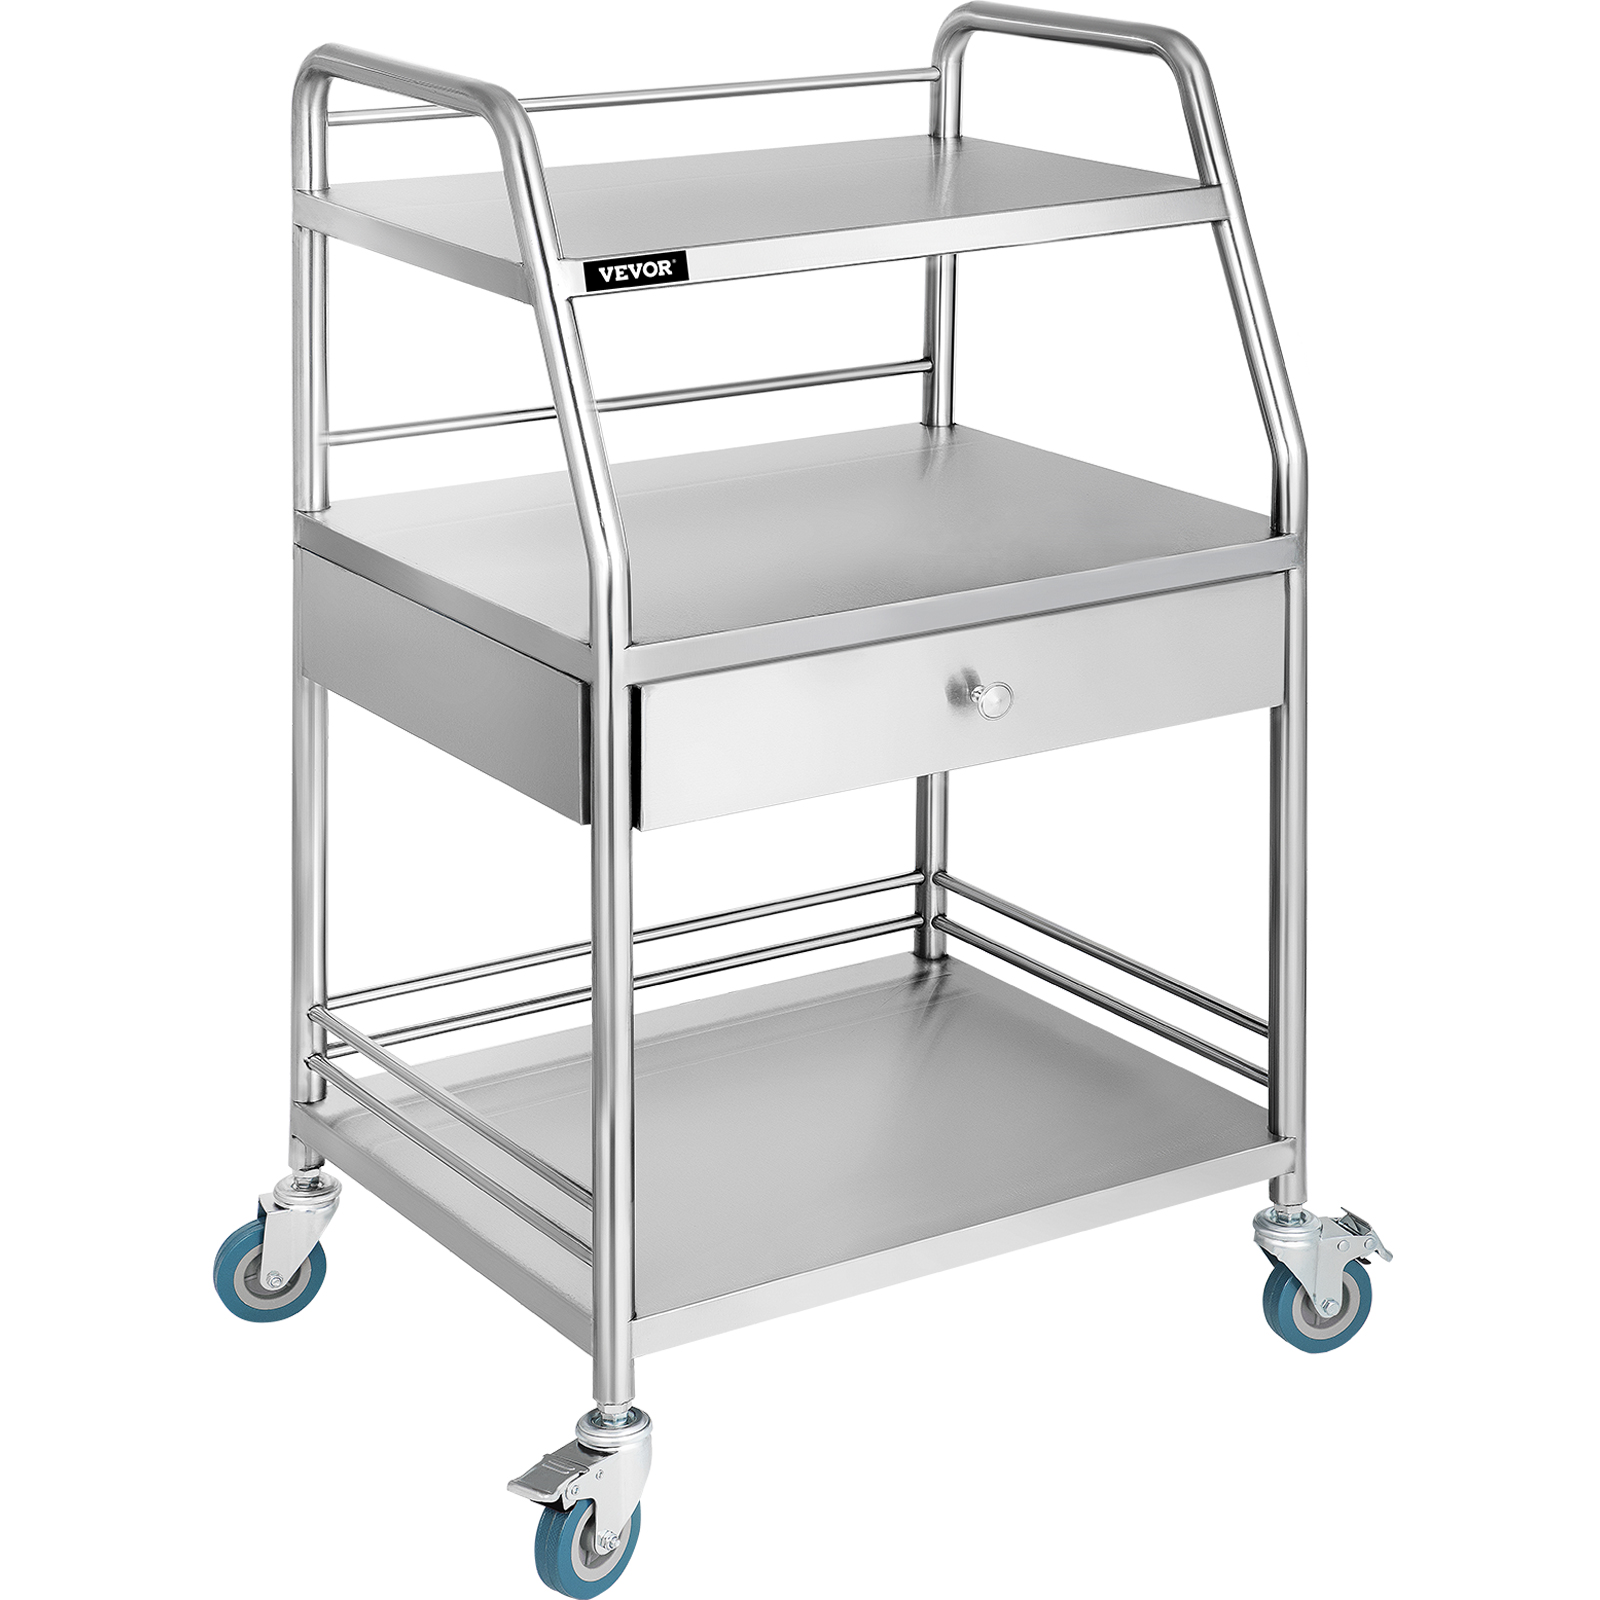 Medical Trolley Mobile Rolling Serving Cart W/ 3 Tiers 1 Drawer Stainless Wheels от Vevor Many GEOs